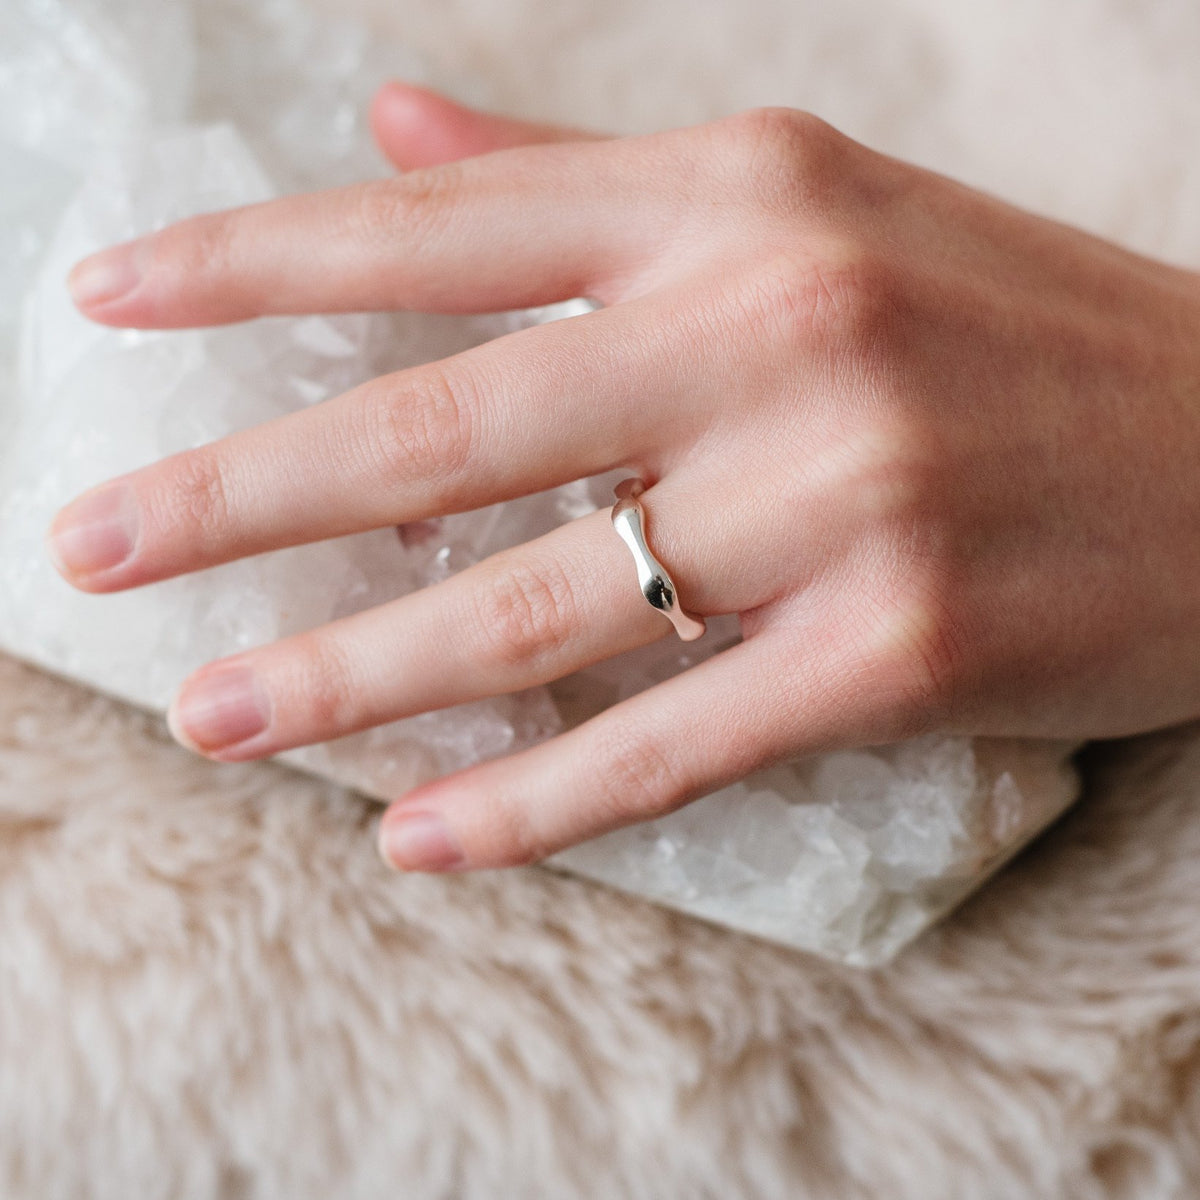 KIND BAND RING - SILVER - SO PRETTY CARA COTTER